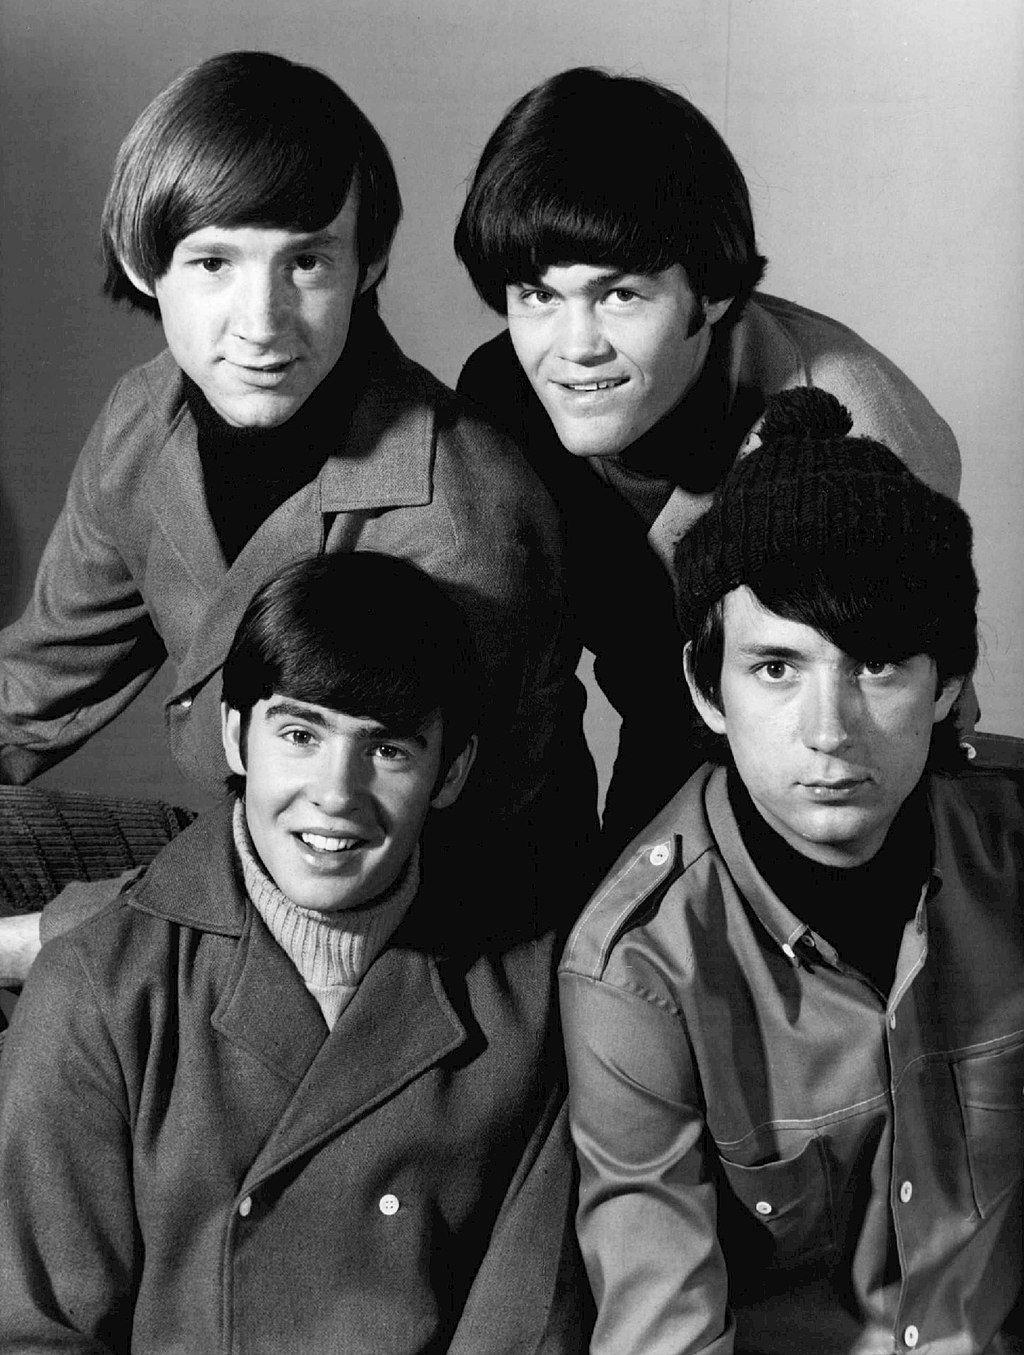 <p>The group was originally created as a made-for-TV band with a television series about the misadventures of a struggling pop group that aired from 1966-1968. When the album "Changes" was released in 1970, it was a major disappointment and the band split just a year later.</p>